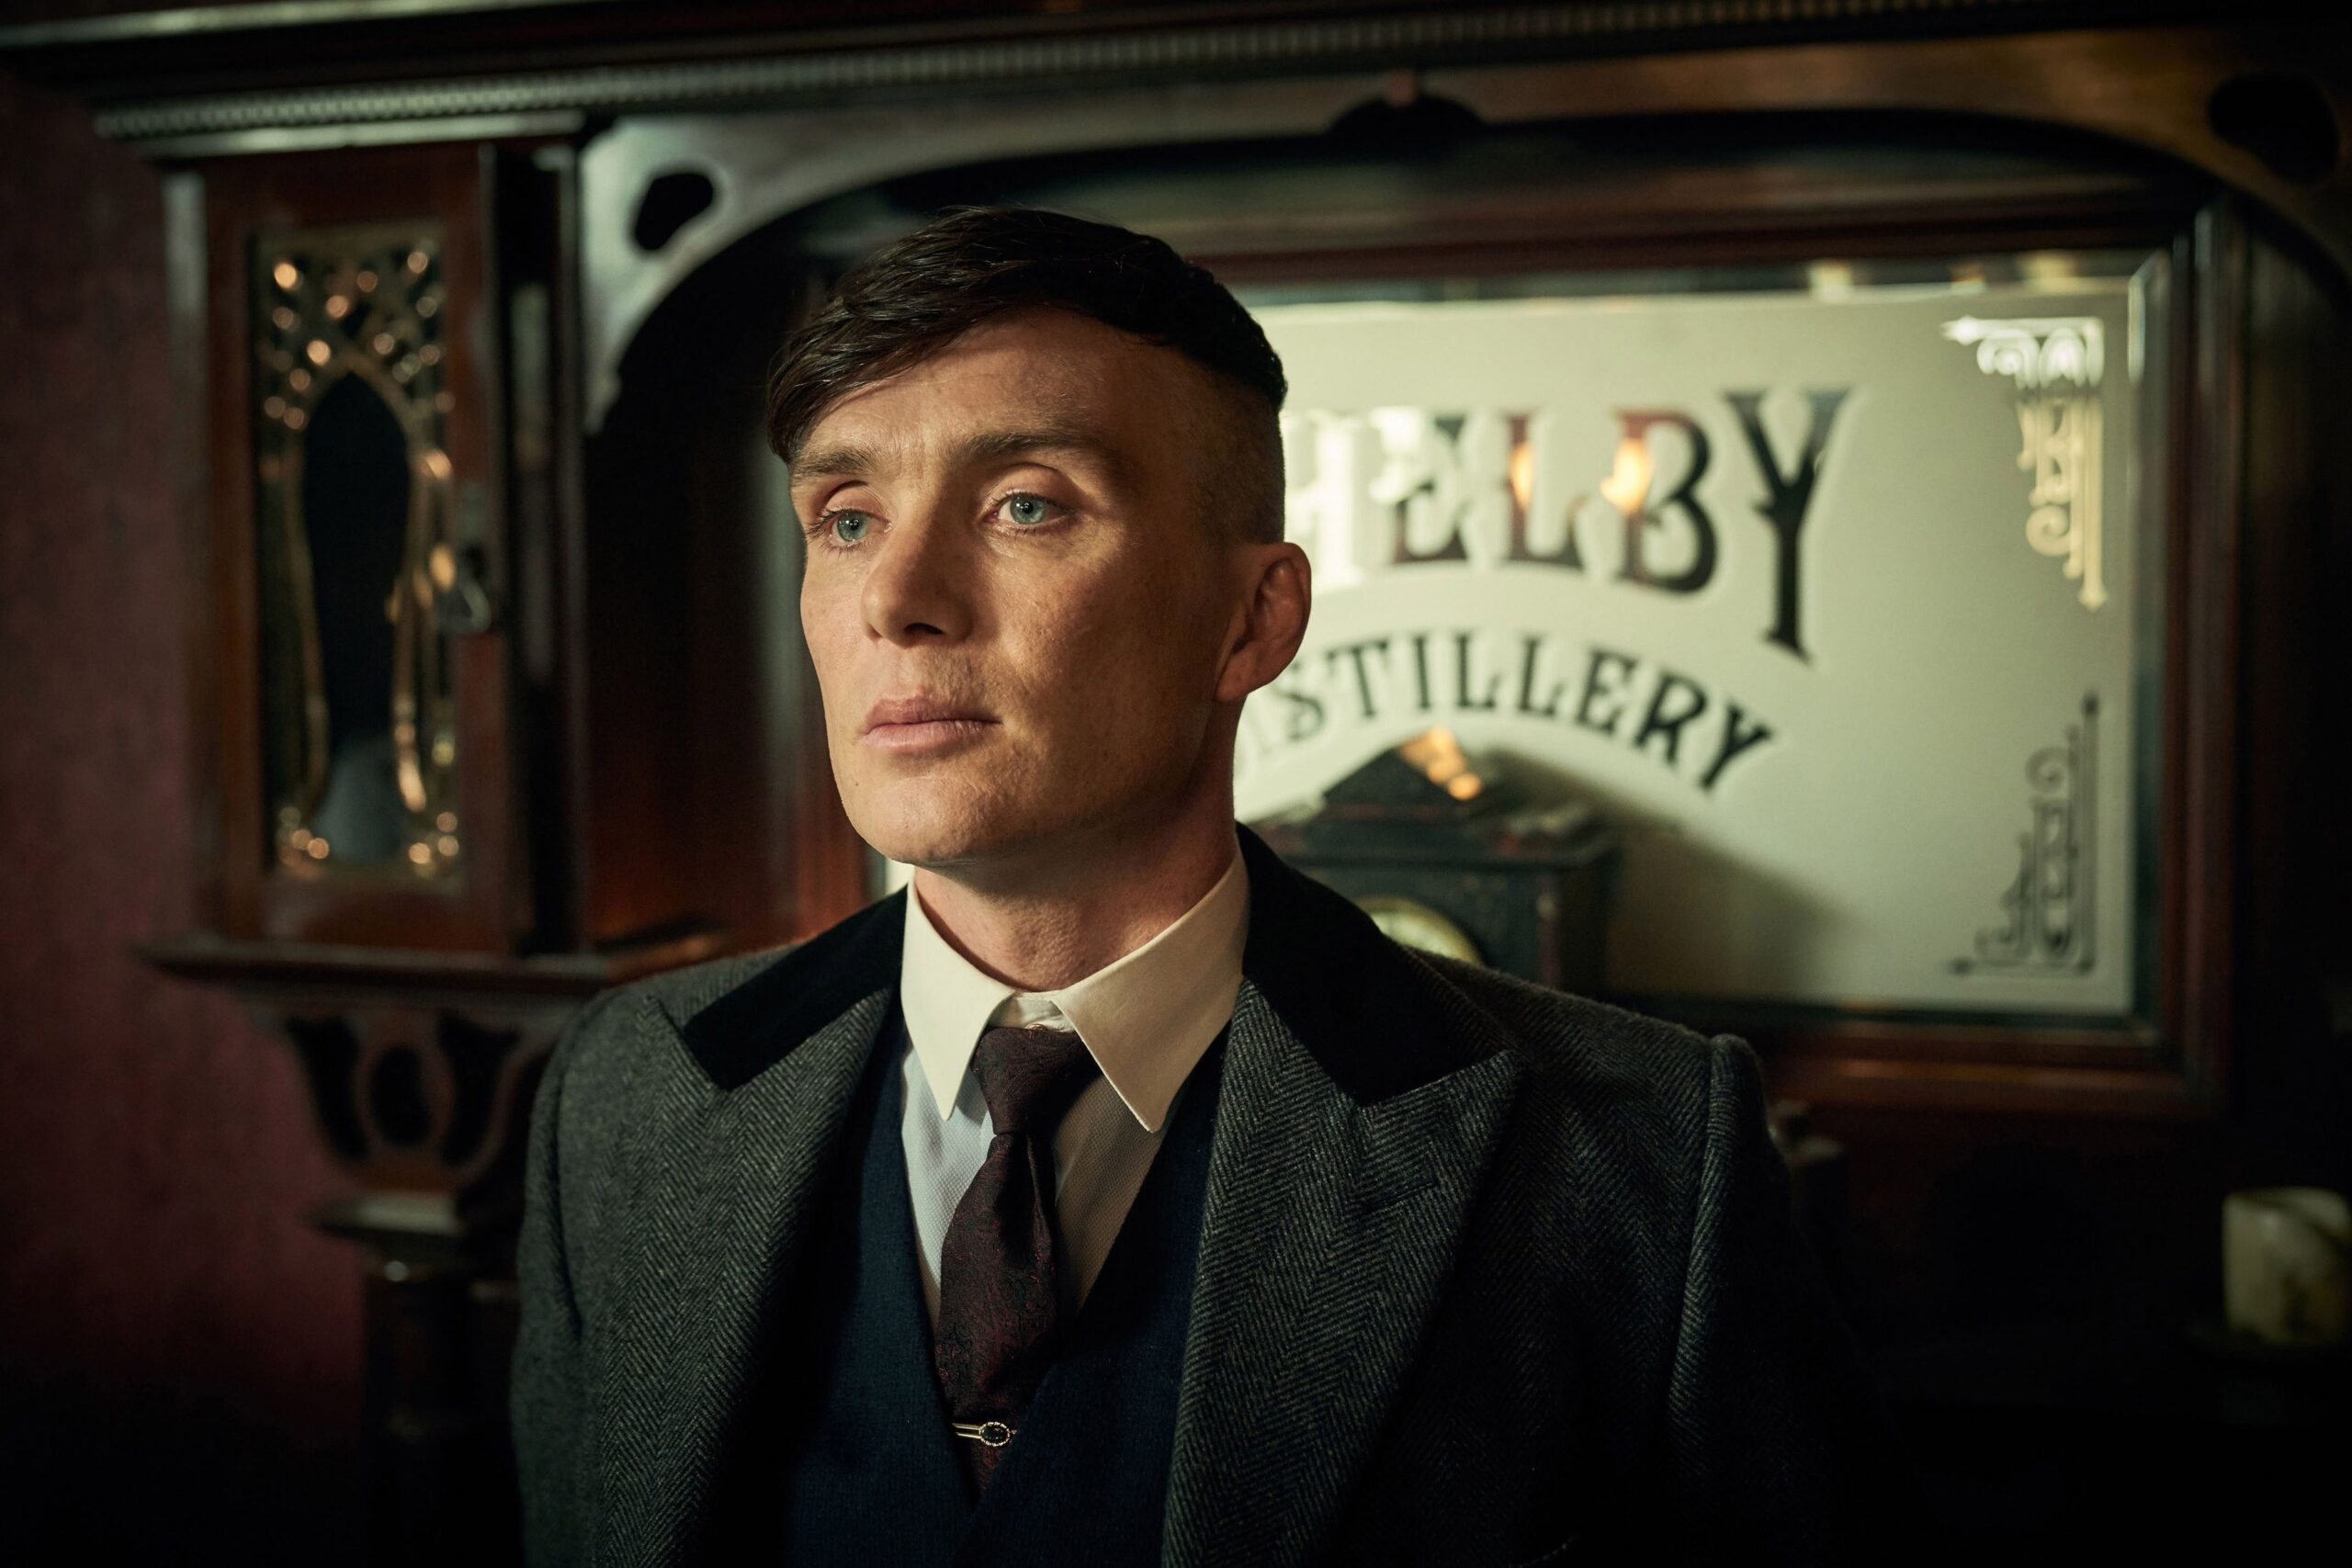 UK. Cillian Murphy in (C)Netflix/ BBC TV Series: Peaky Blinders - season 5 (2019). 
Ref: LMK106-J8021-040422
Supplied by LMKMEDIA. Editorial Only.
Landmark Media is not the copyright owner of these Film or TV stills but provides a service only for recognised Media outlets. pictures@lmkmedia.com,Image: 681149679, License: Rights-managed, Restrictions: Supplied by Landmark Media. Editorial Only. Landmark Media is not the copyright owner of these Film or TV stills but provides a service only for recognised Media outlets. Per la presente foto non è stata rilasciata liberatoria. Ai sensi di legge e come gi, Model Release: no, Credit line: Supplied by LMK / ipa-agency.net / IPA / Profimedia